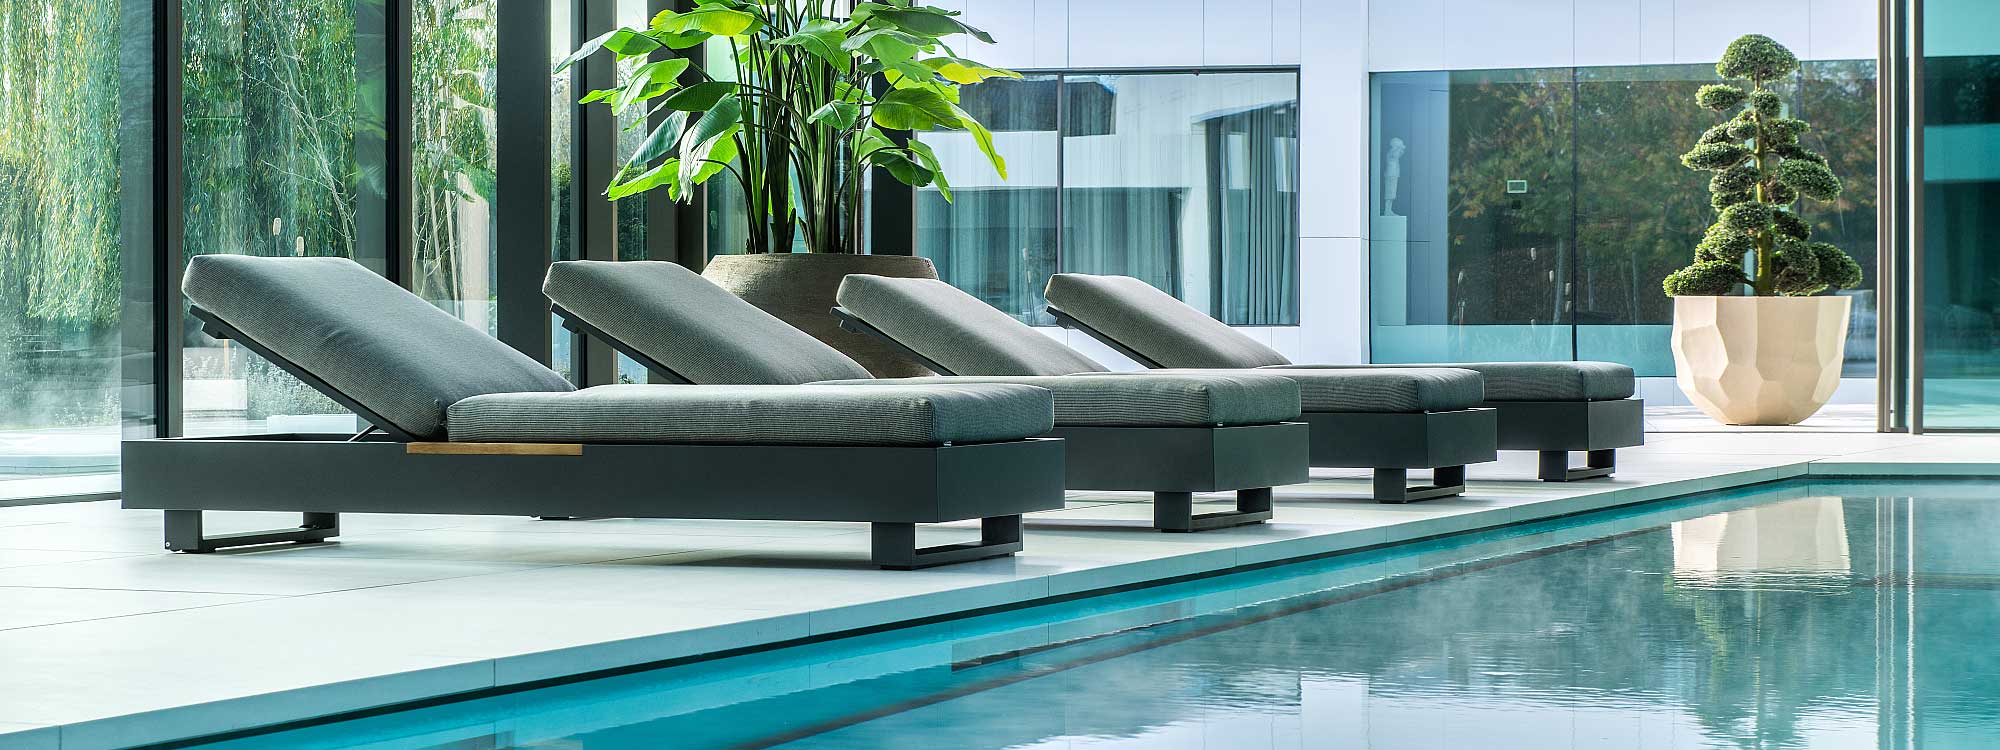 Image of row of 4 Bari luxury sun loungers in charcoal coloured aluminium along interior poolside, with large plant pots and cloud pruned shrub in the background